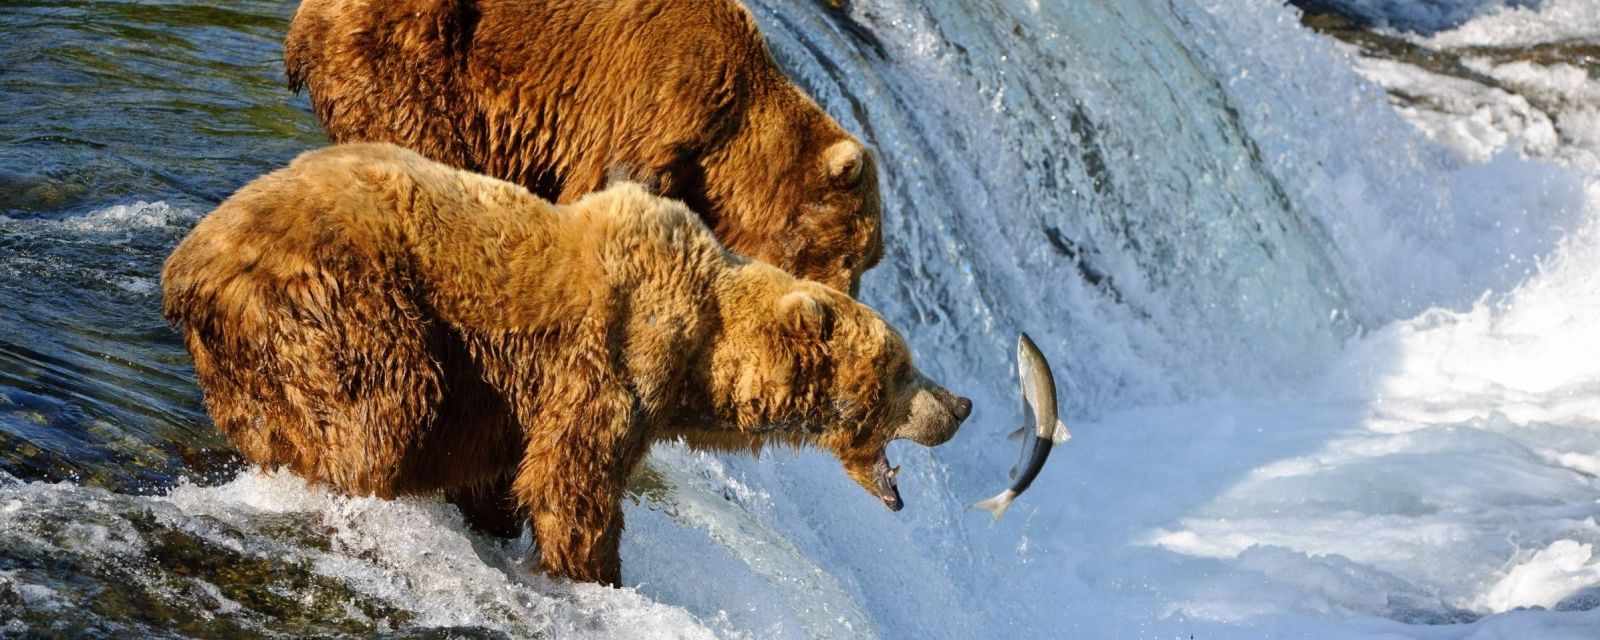 Brooks Falls in the Katmai National Park - Monthly Bear Guide